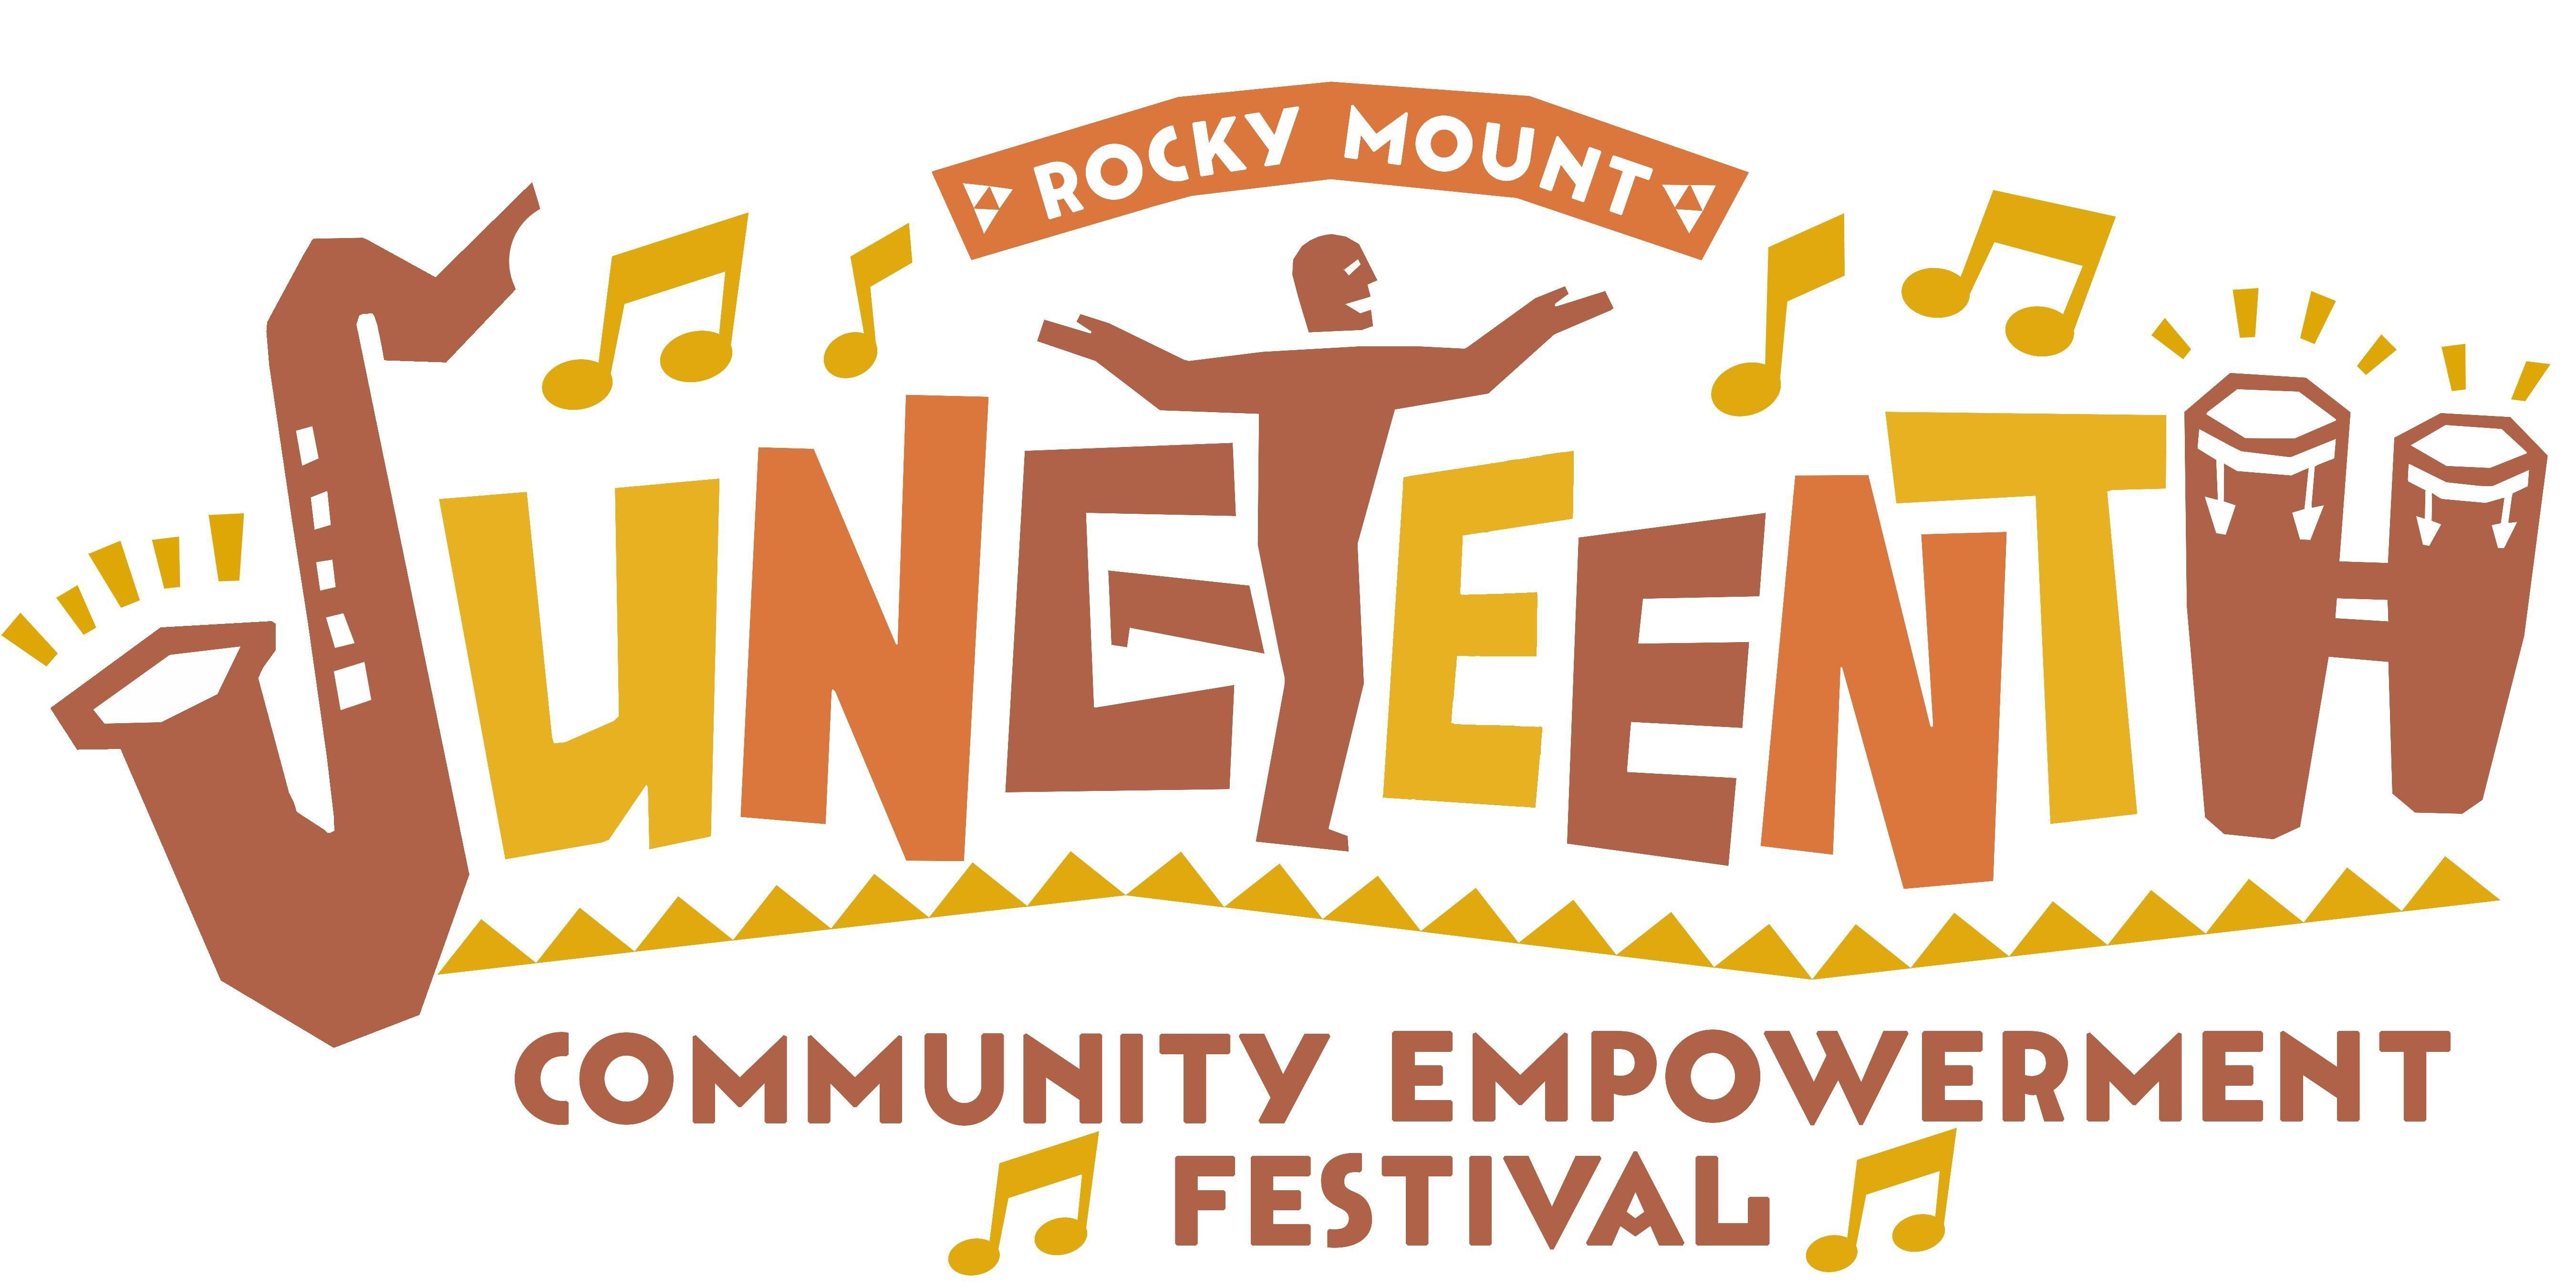 Juneteenth Logo - Juneteenth headliners to be announced via mobile messaging